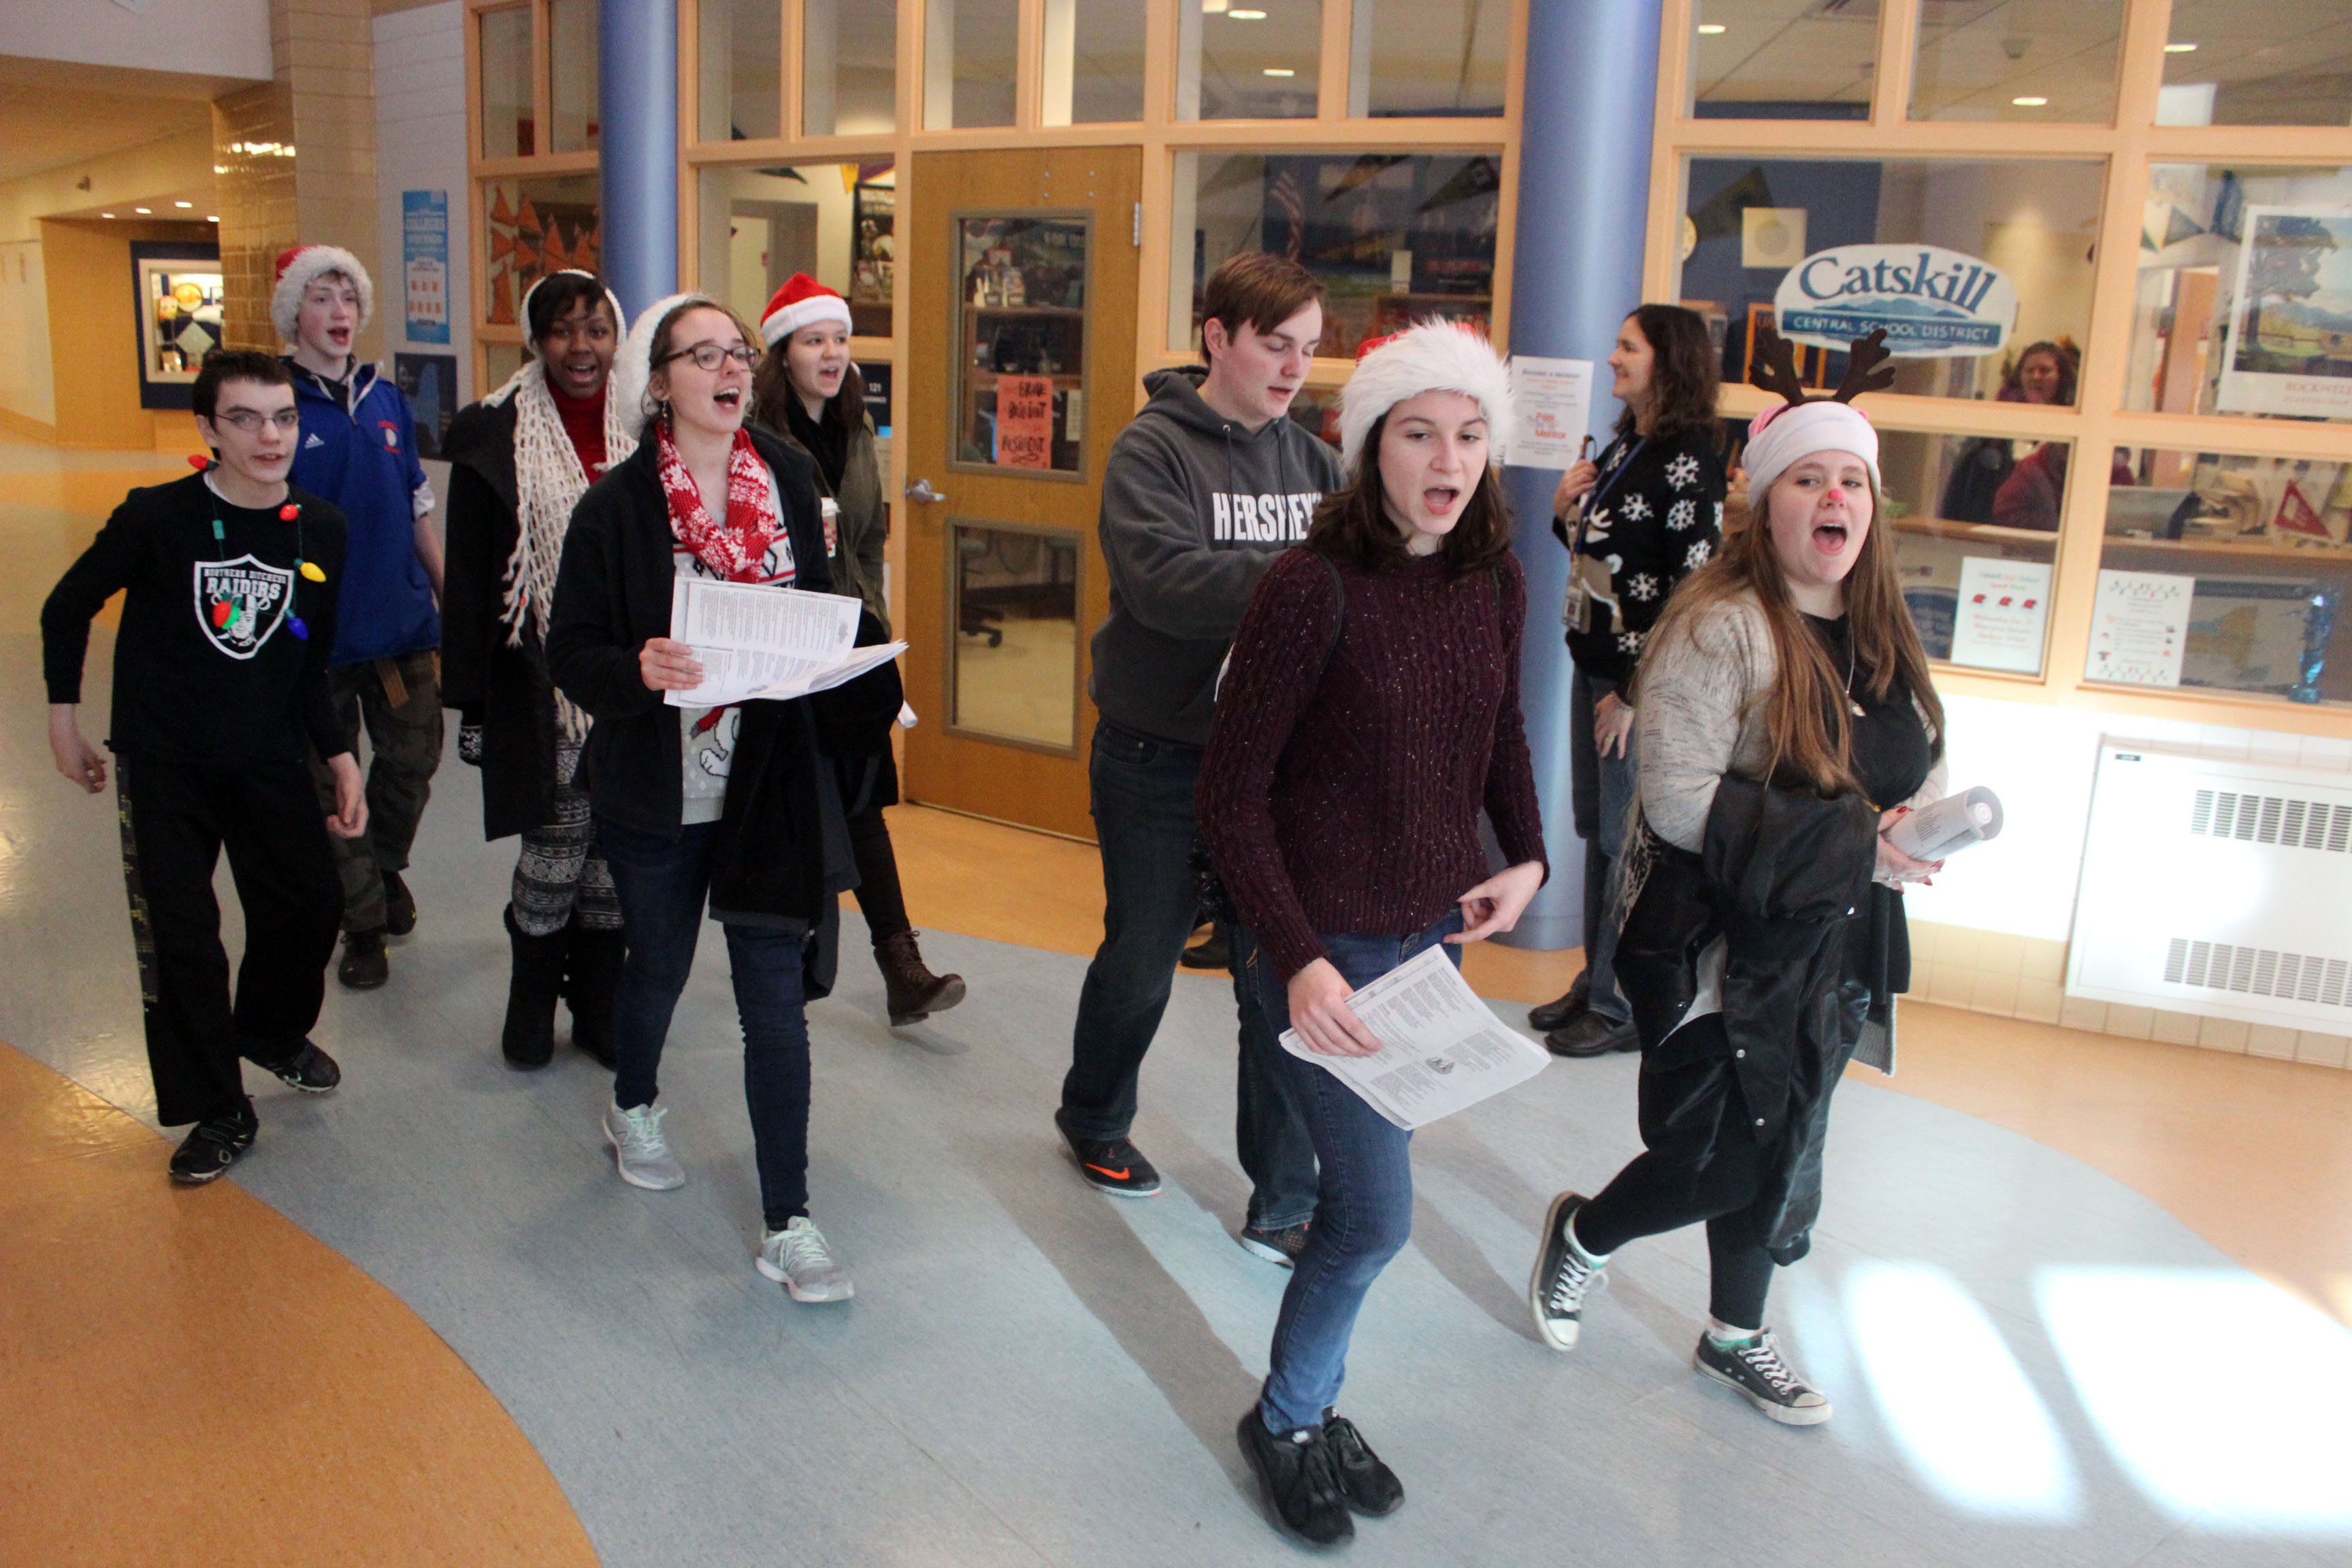 Carolers sing in the halls of CHS